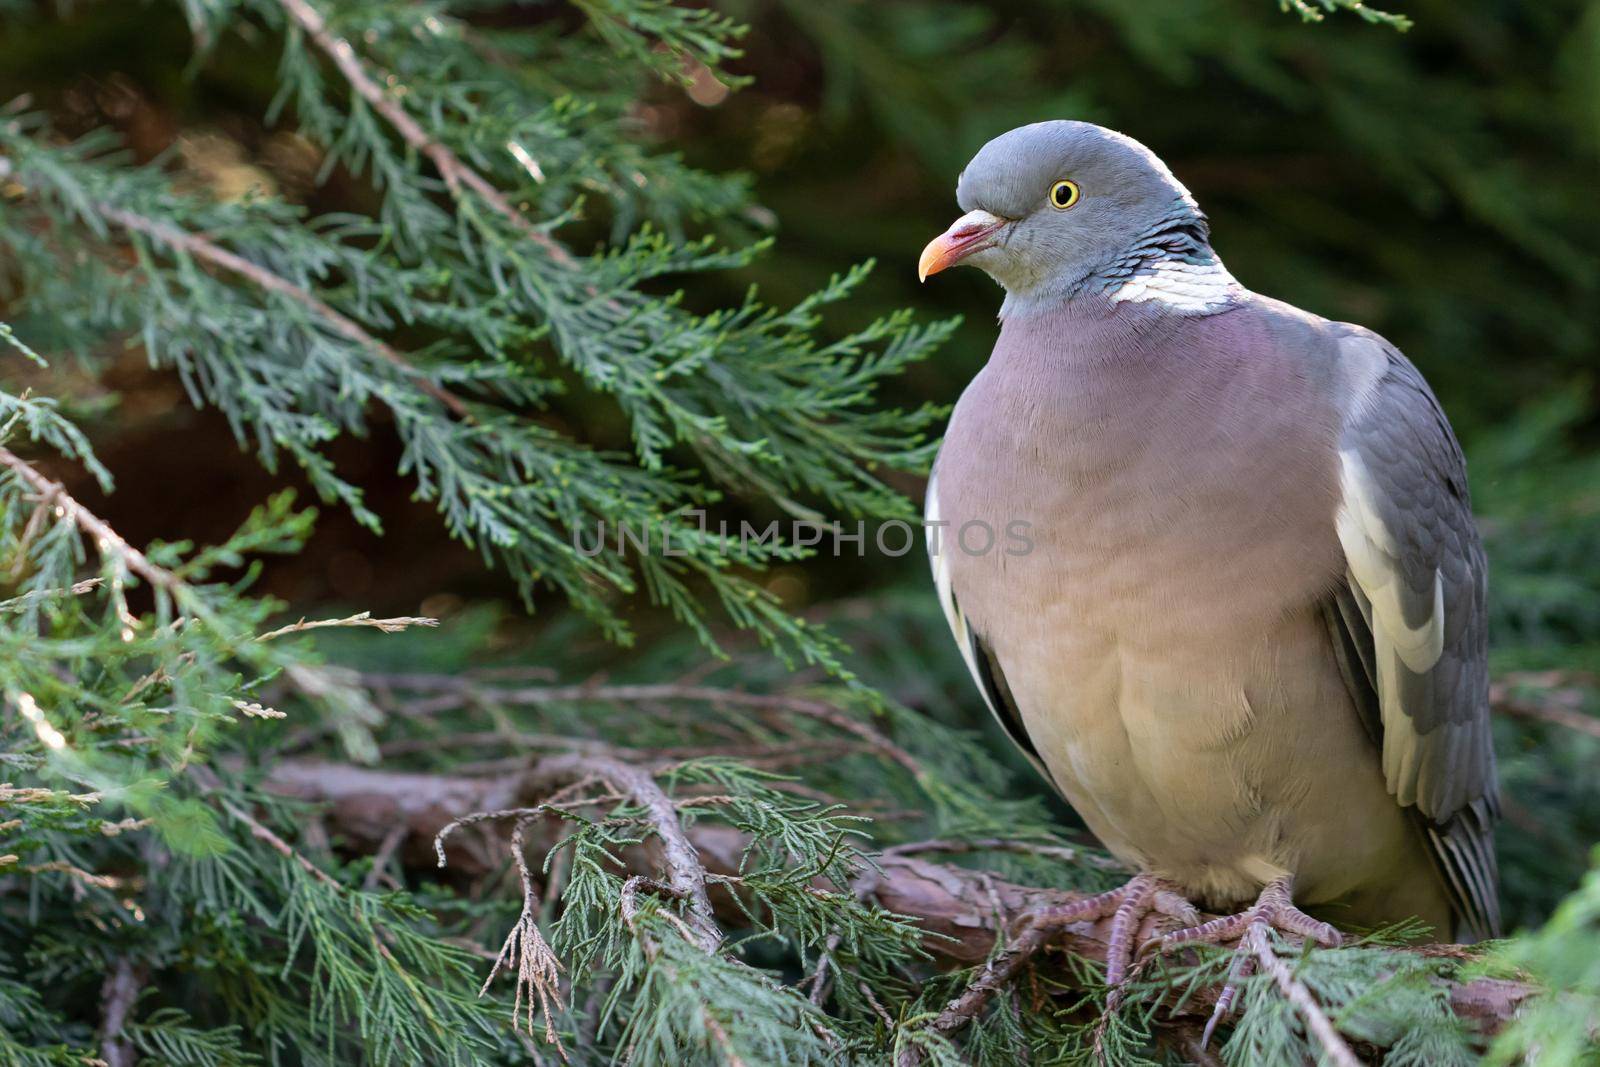 Ring-necked dove on a branch by clusterx